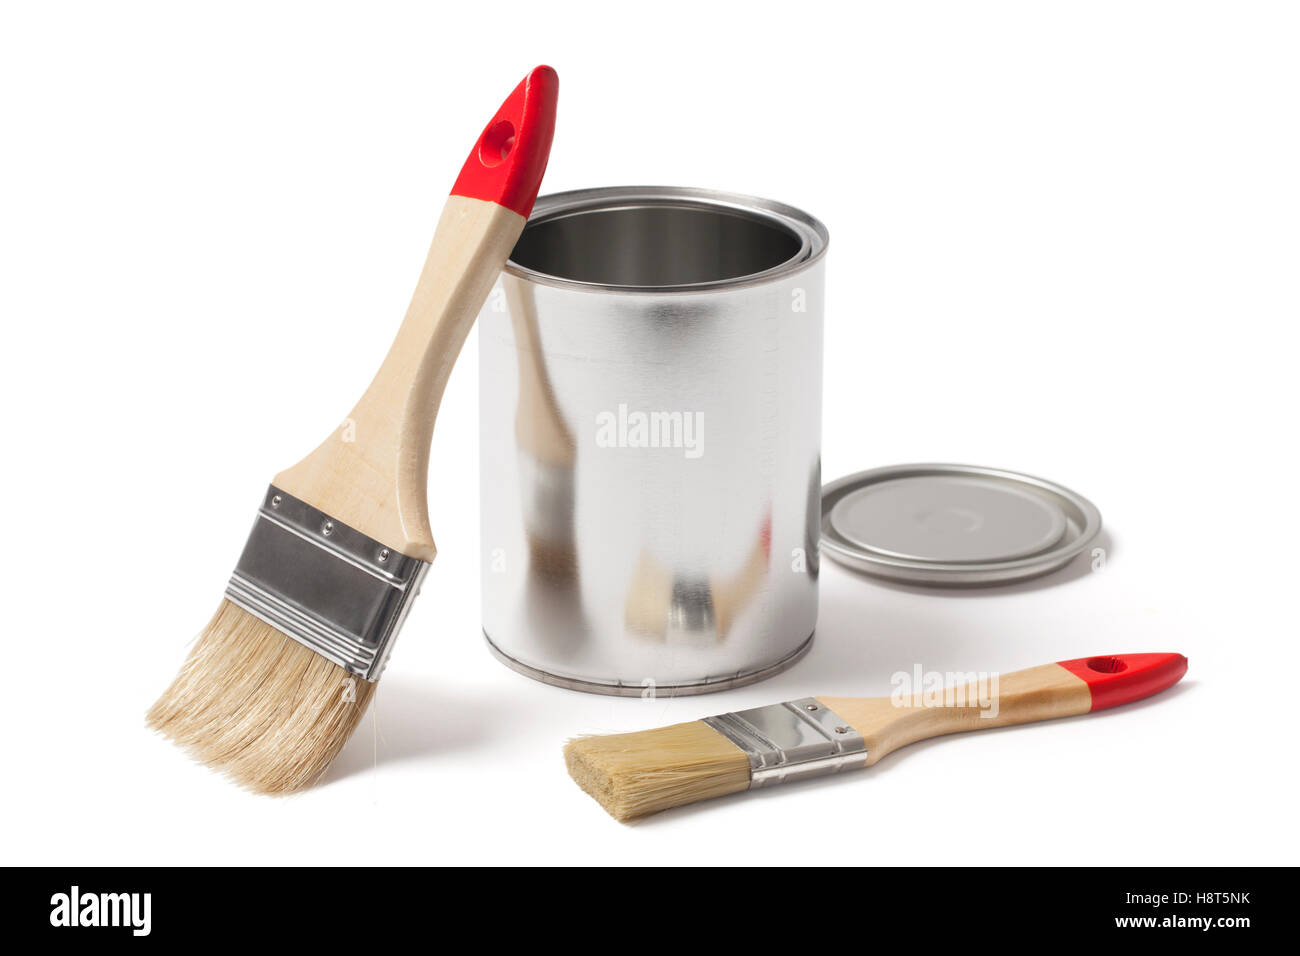 Metallic can for paint with an open lid and two new paint brushes isolated on white background with clipping path. Stock Photo